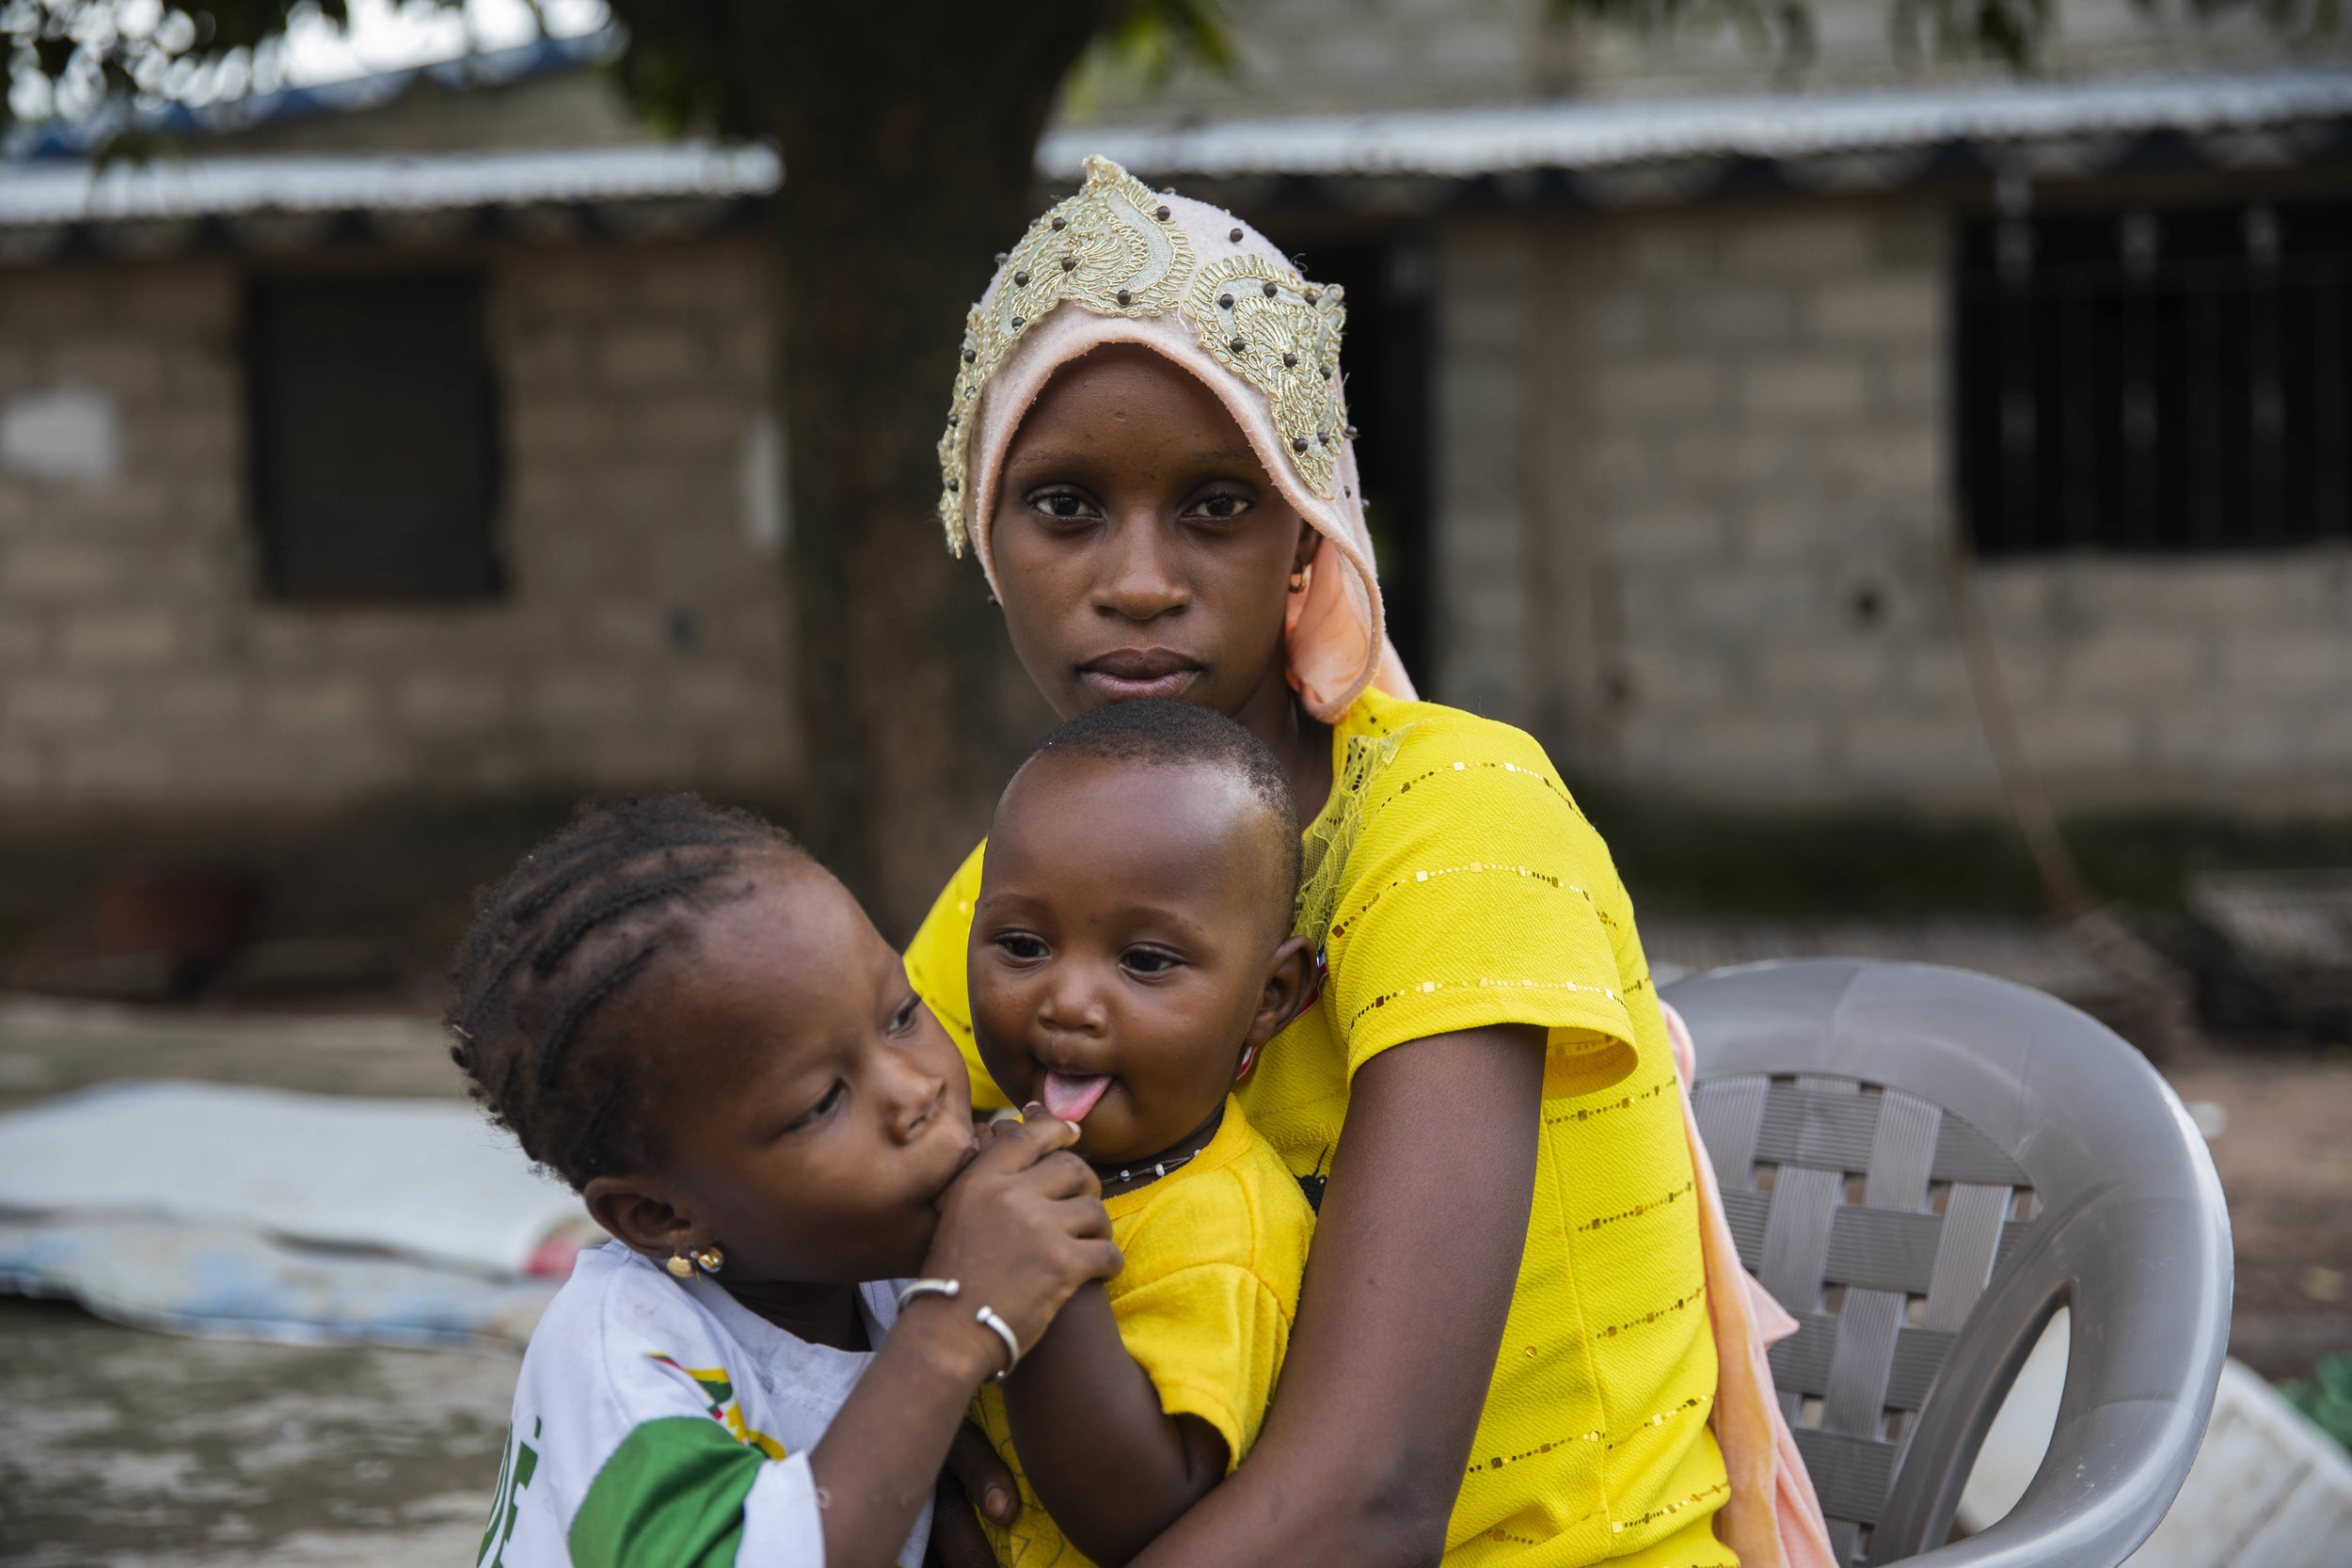  Mariama Diao, has two children, Binta and Mamadou Mballo. She is married to Seckou Mballo who runs one of the bigger shops in a small town outside of Kolda, Senegal. Mariama’s first pregnancy had complications and with the help of Binta Sall, the he